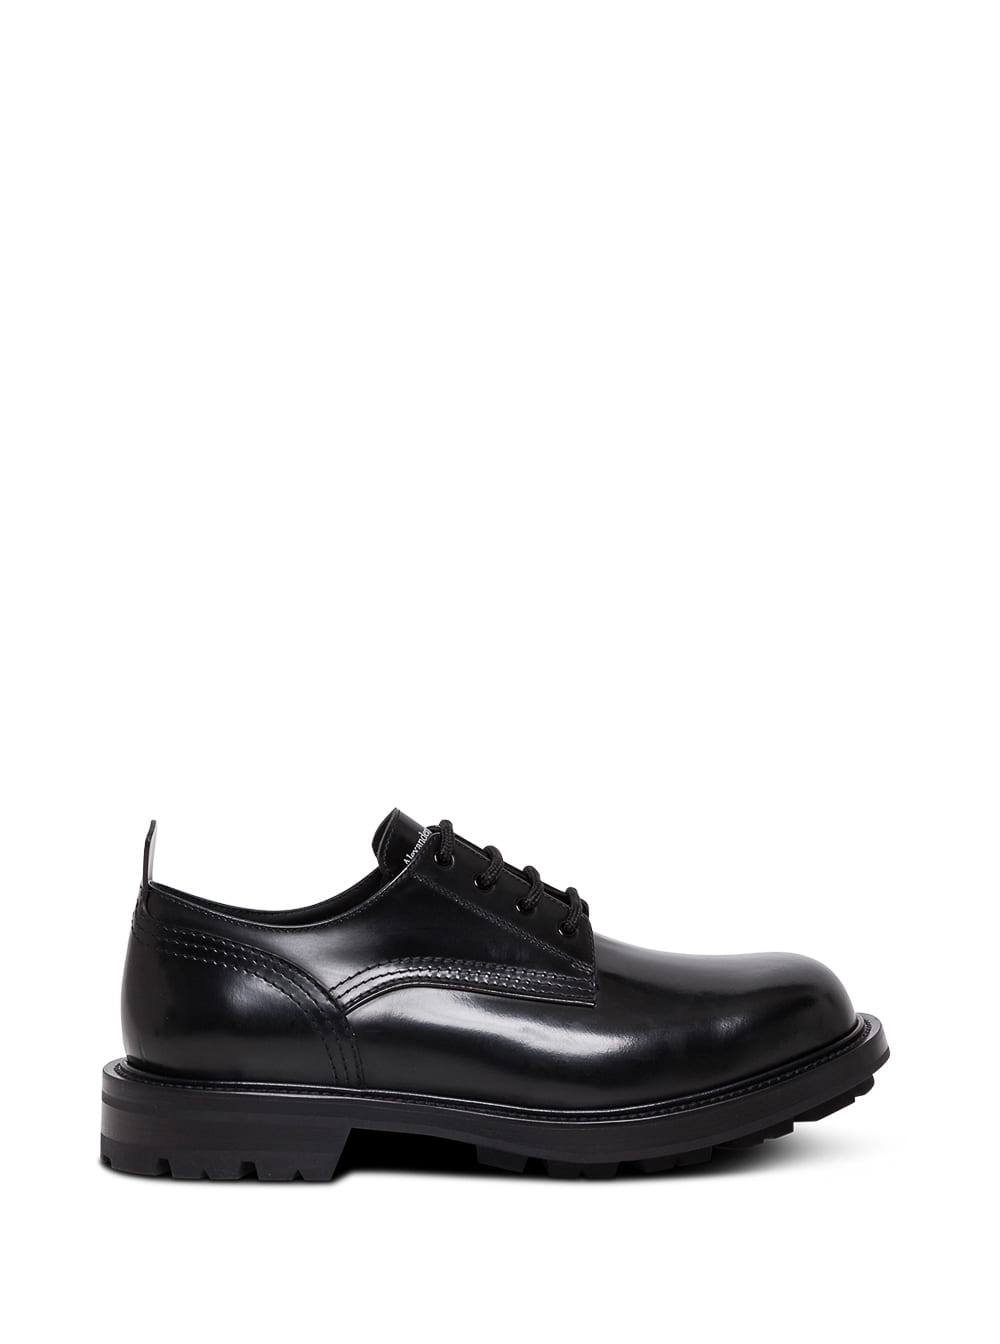 Alexander McQueen Black Leather Lace-up Shoes With Tank Sole